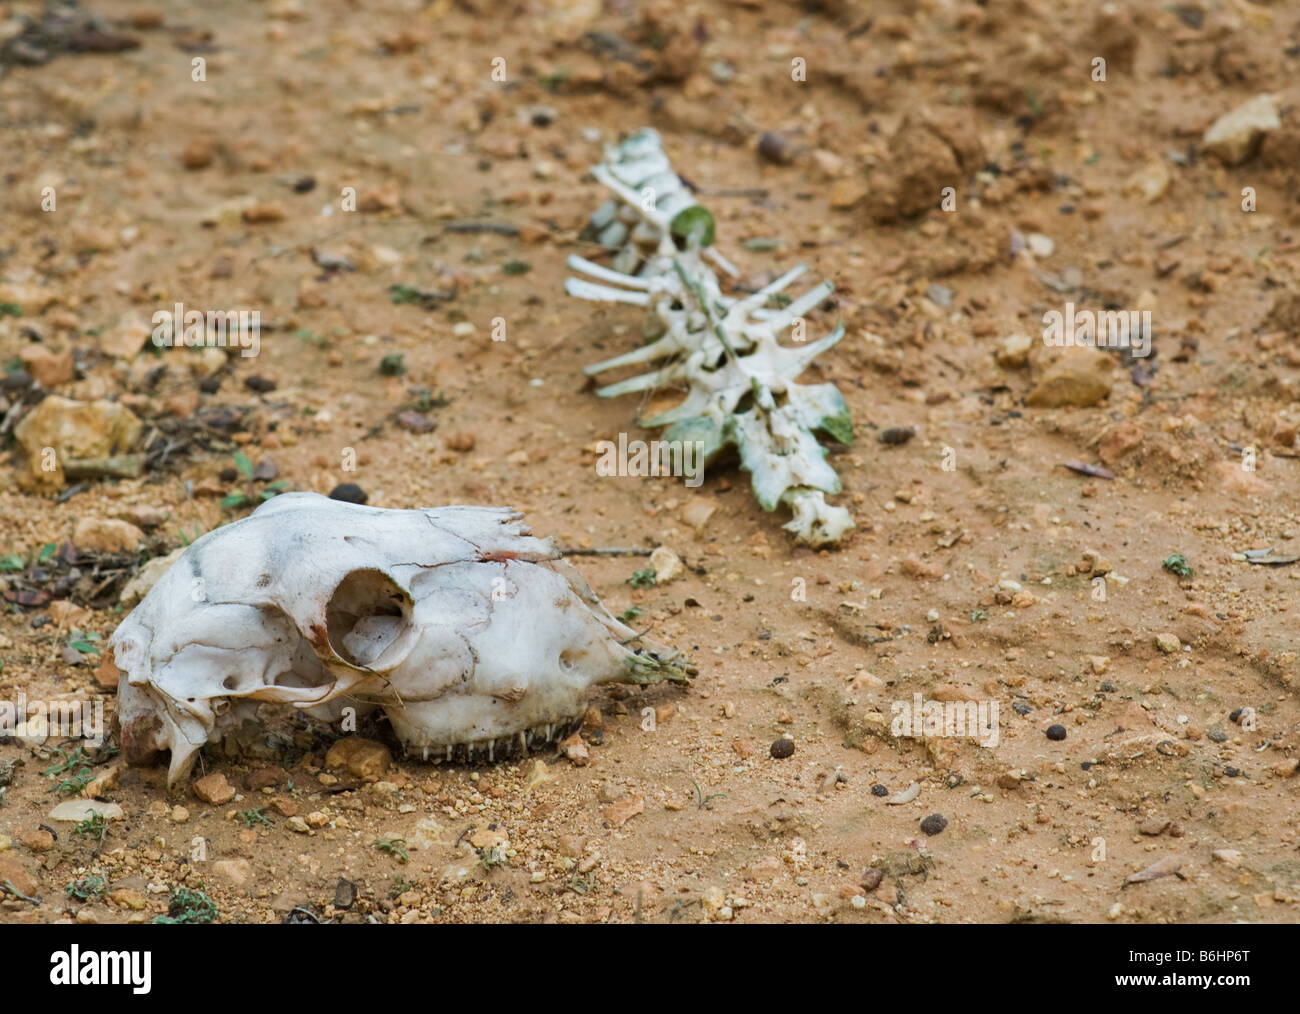 Animal skeleton, including skull, laying in clay-type earth in Almansa, Spain, Europe Stock Photo